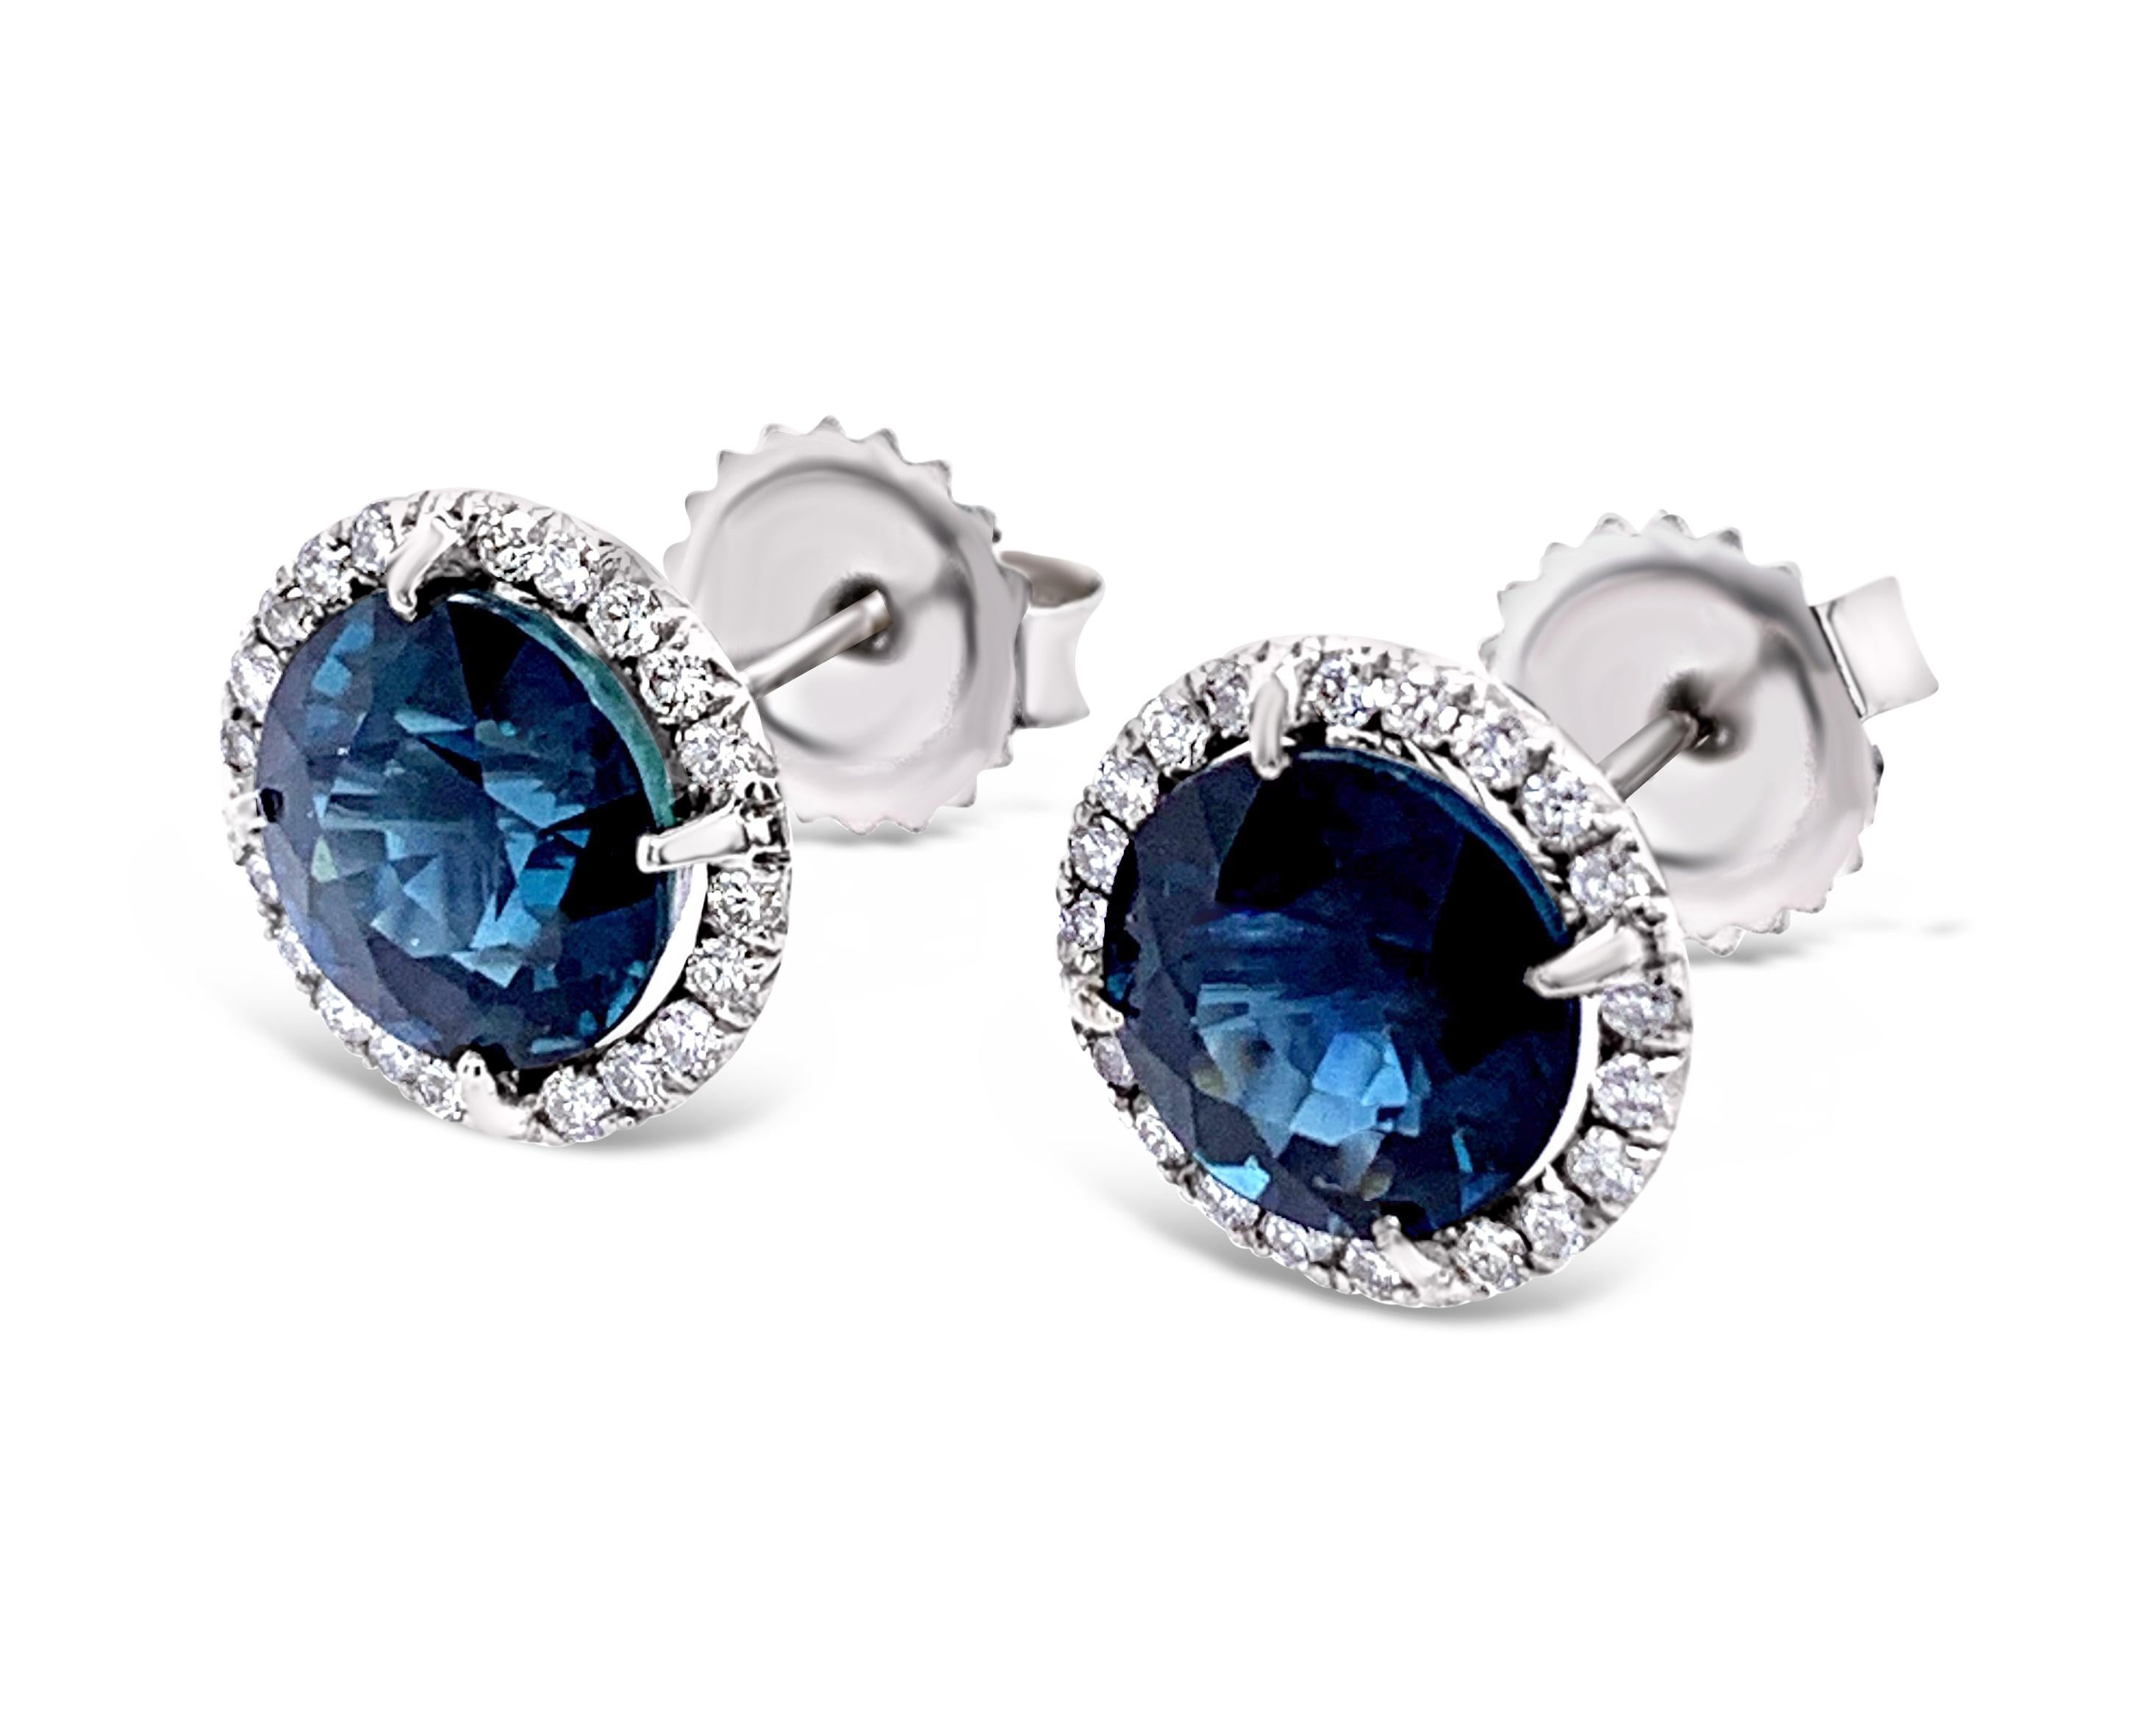 Round Cut 4.15 Carat 'Total Weight' Sapphire and Diamond Halo Stud Earrings For Sale